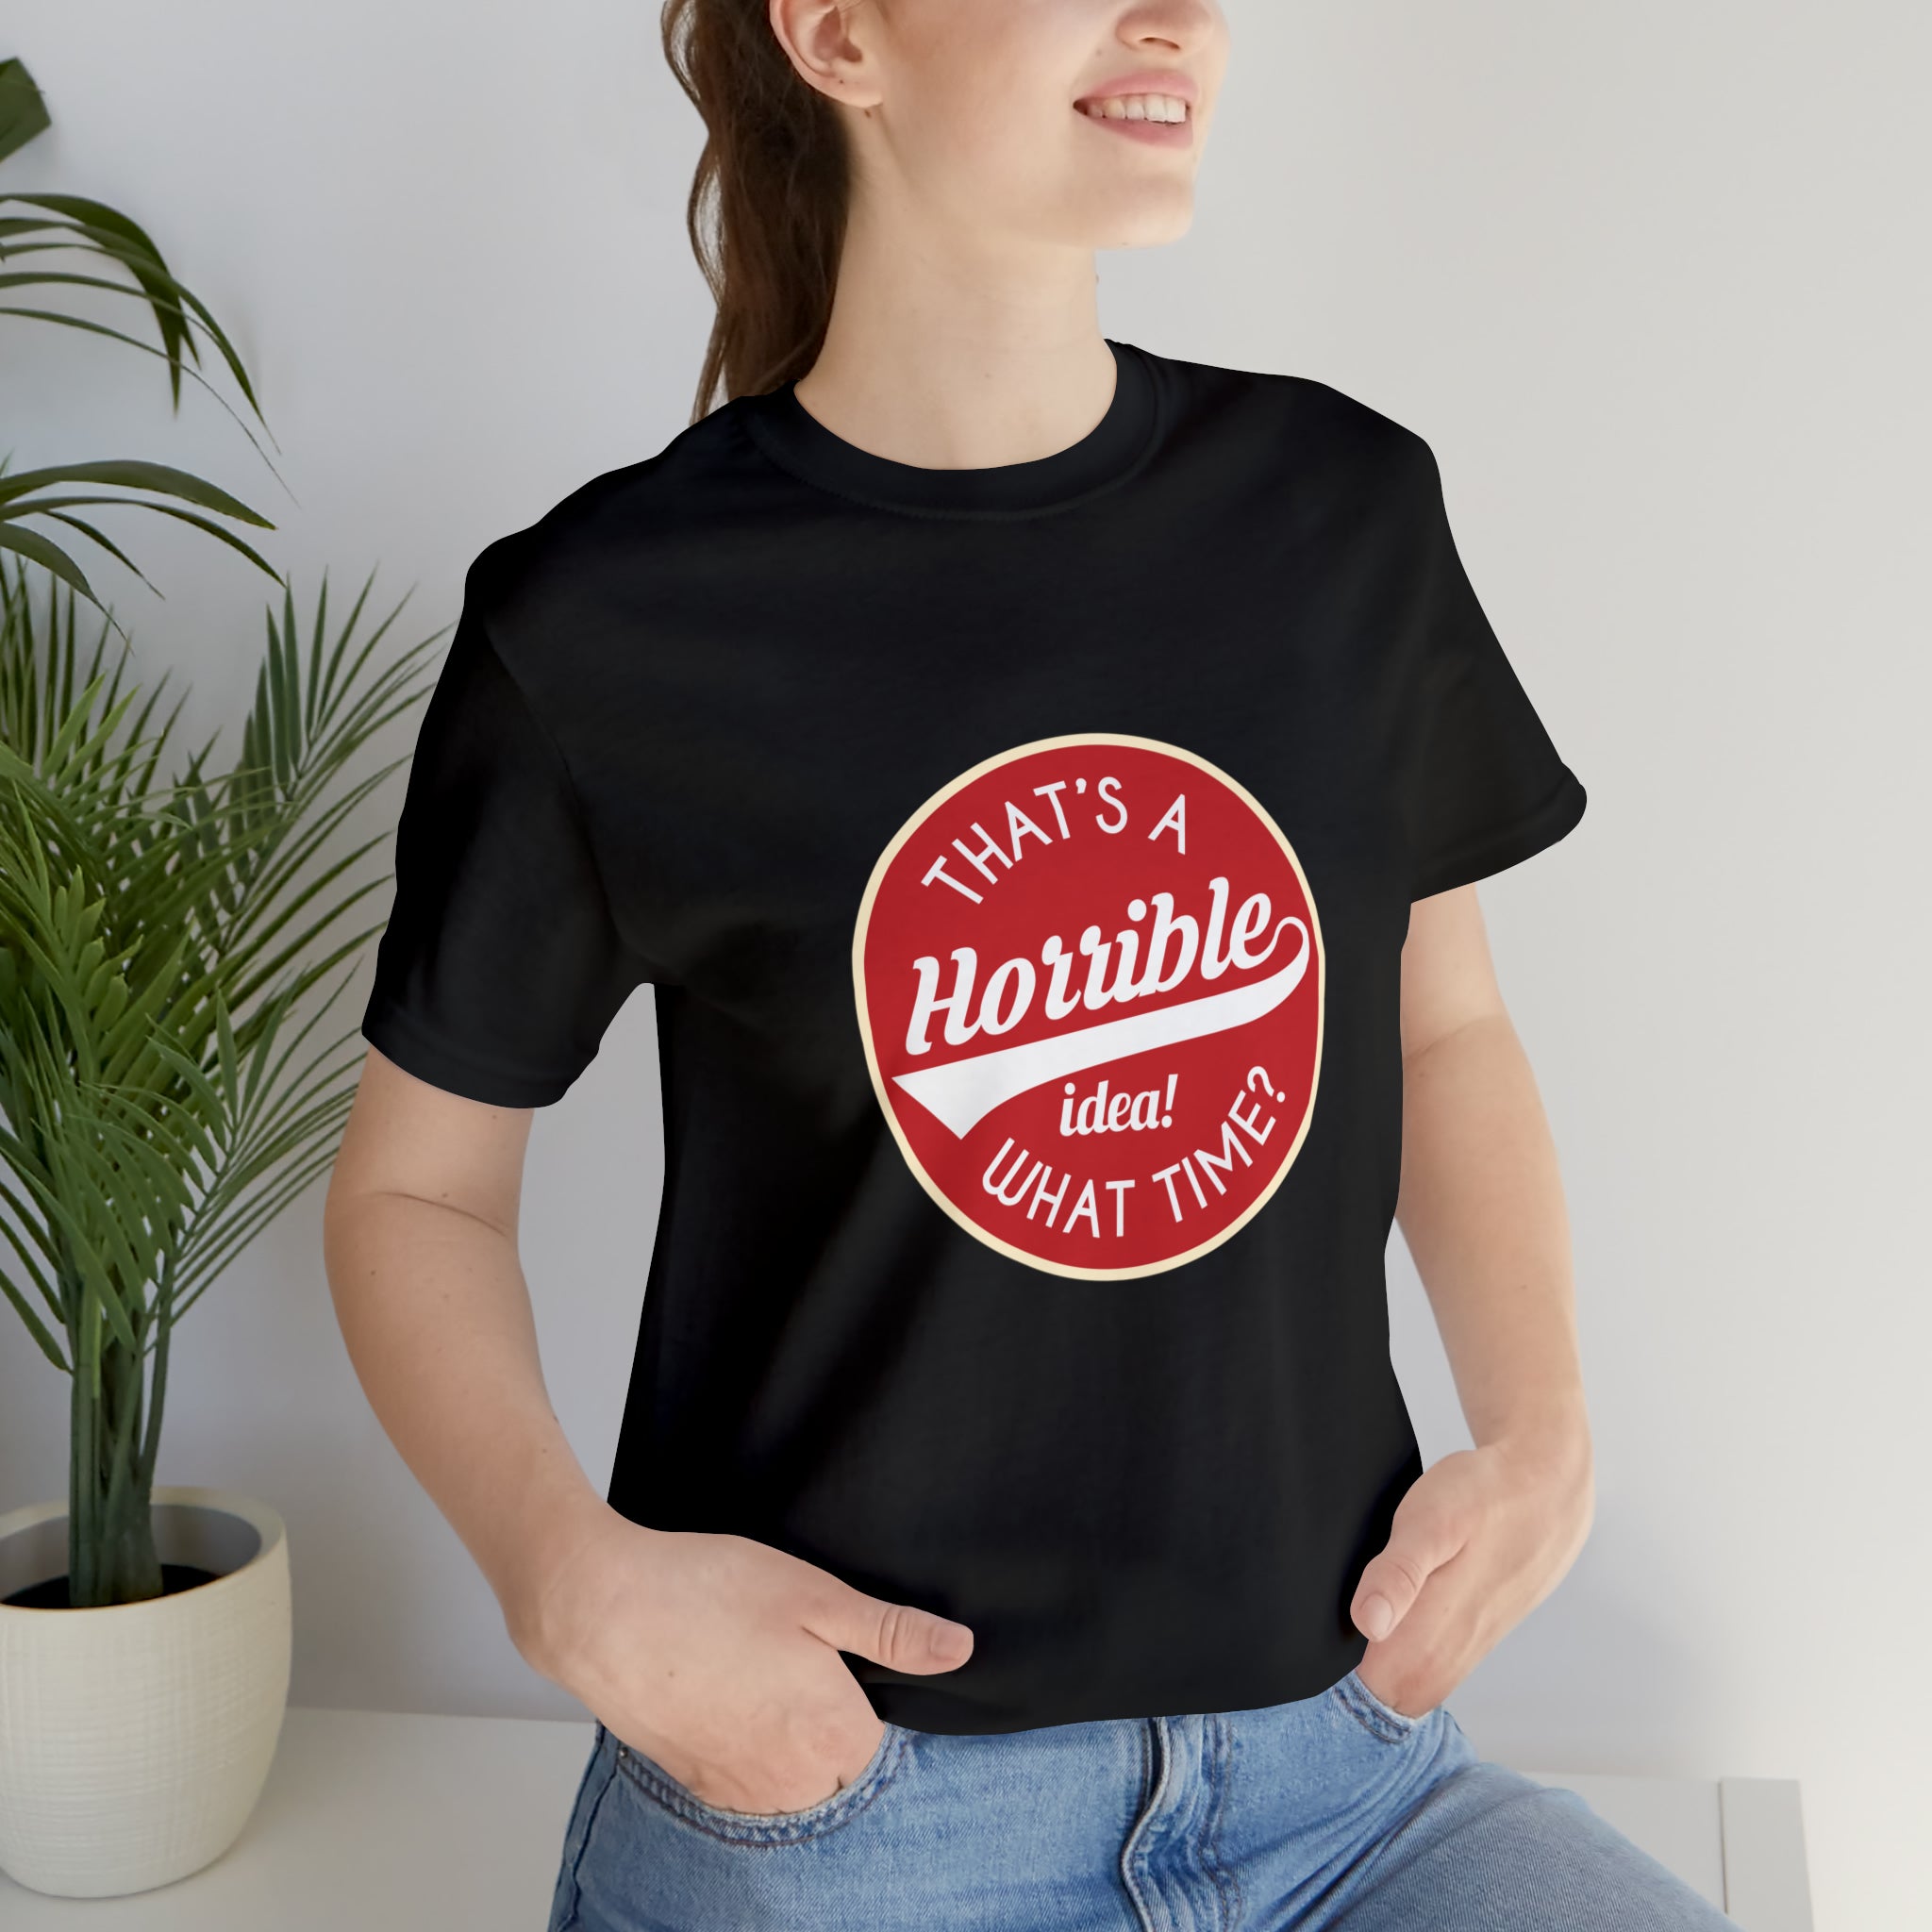 A woman wearing a black That's a horrible idea - what time T-Shirt.